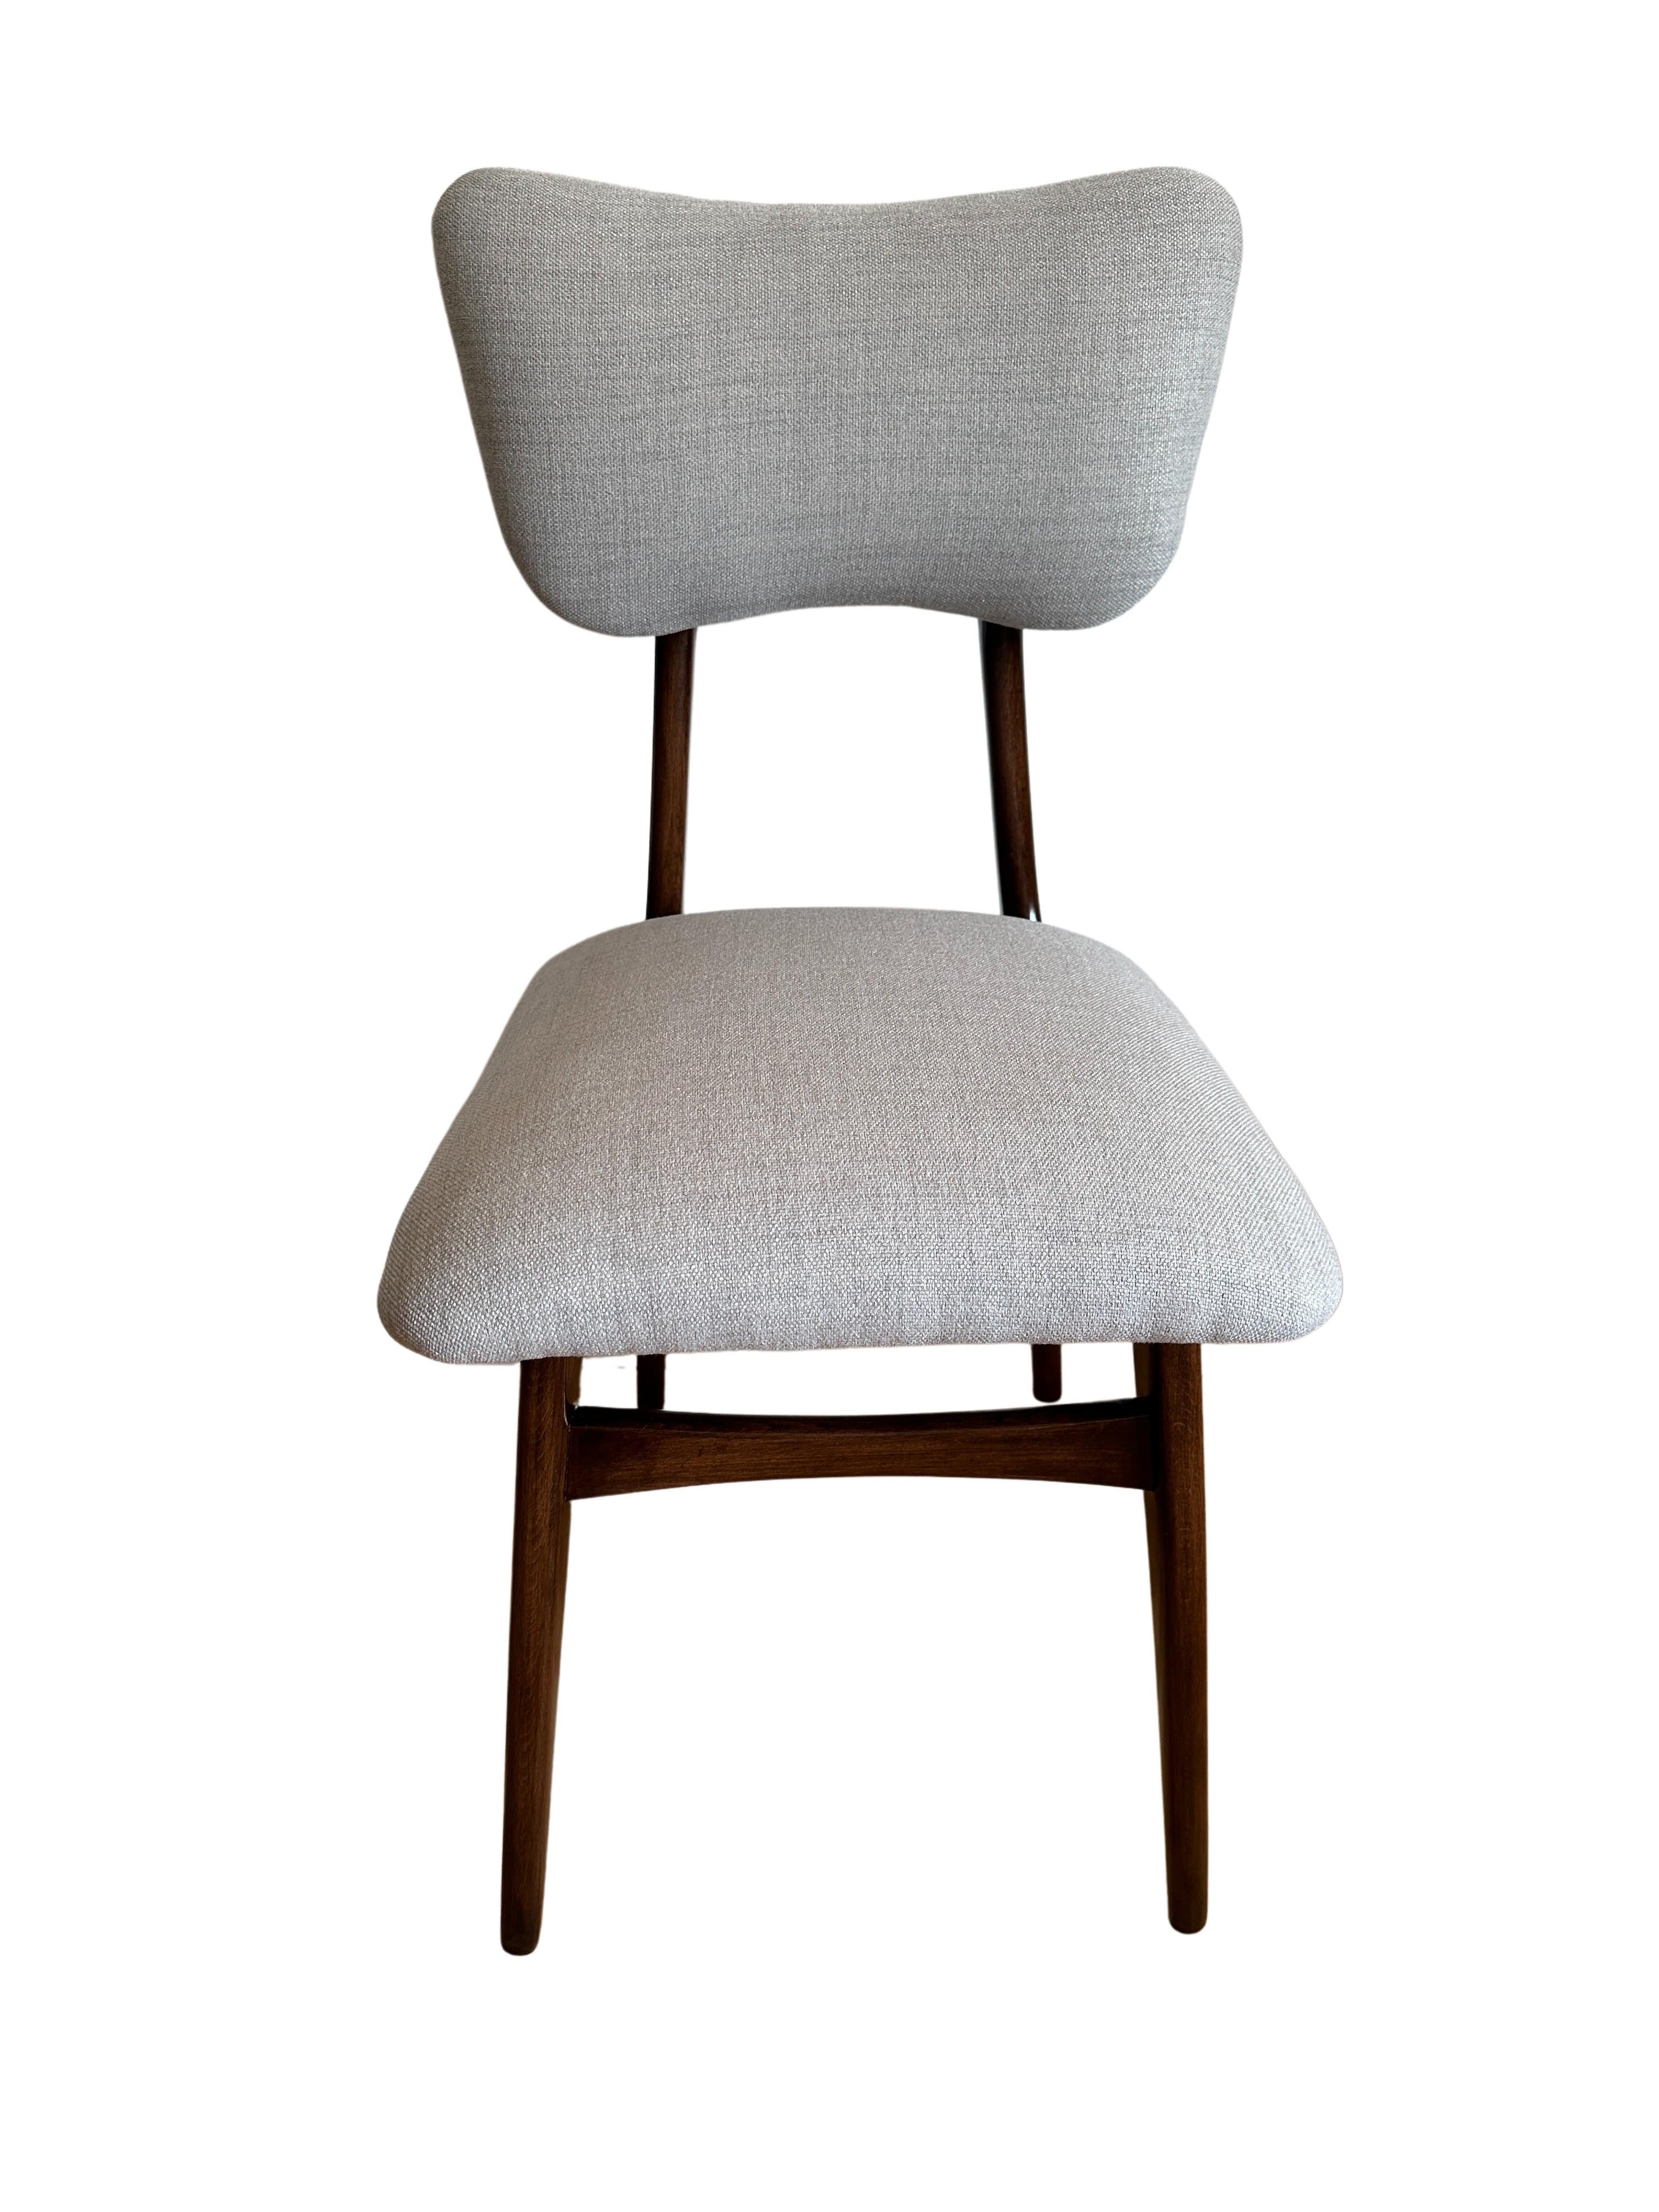 Set of 2 Midcentury Grey Dining Chairs, Europe, 1960s For Sale 6